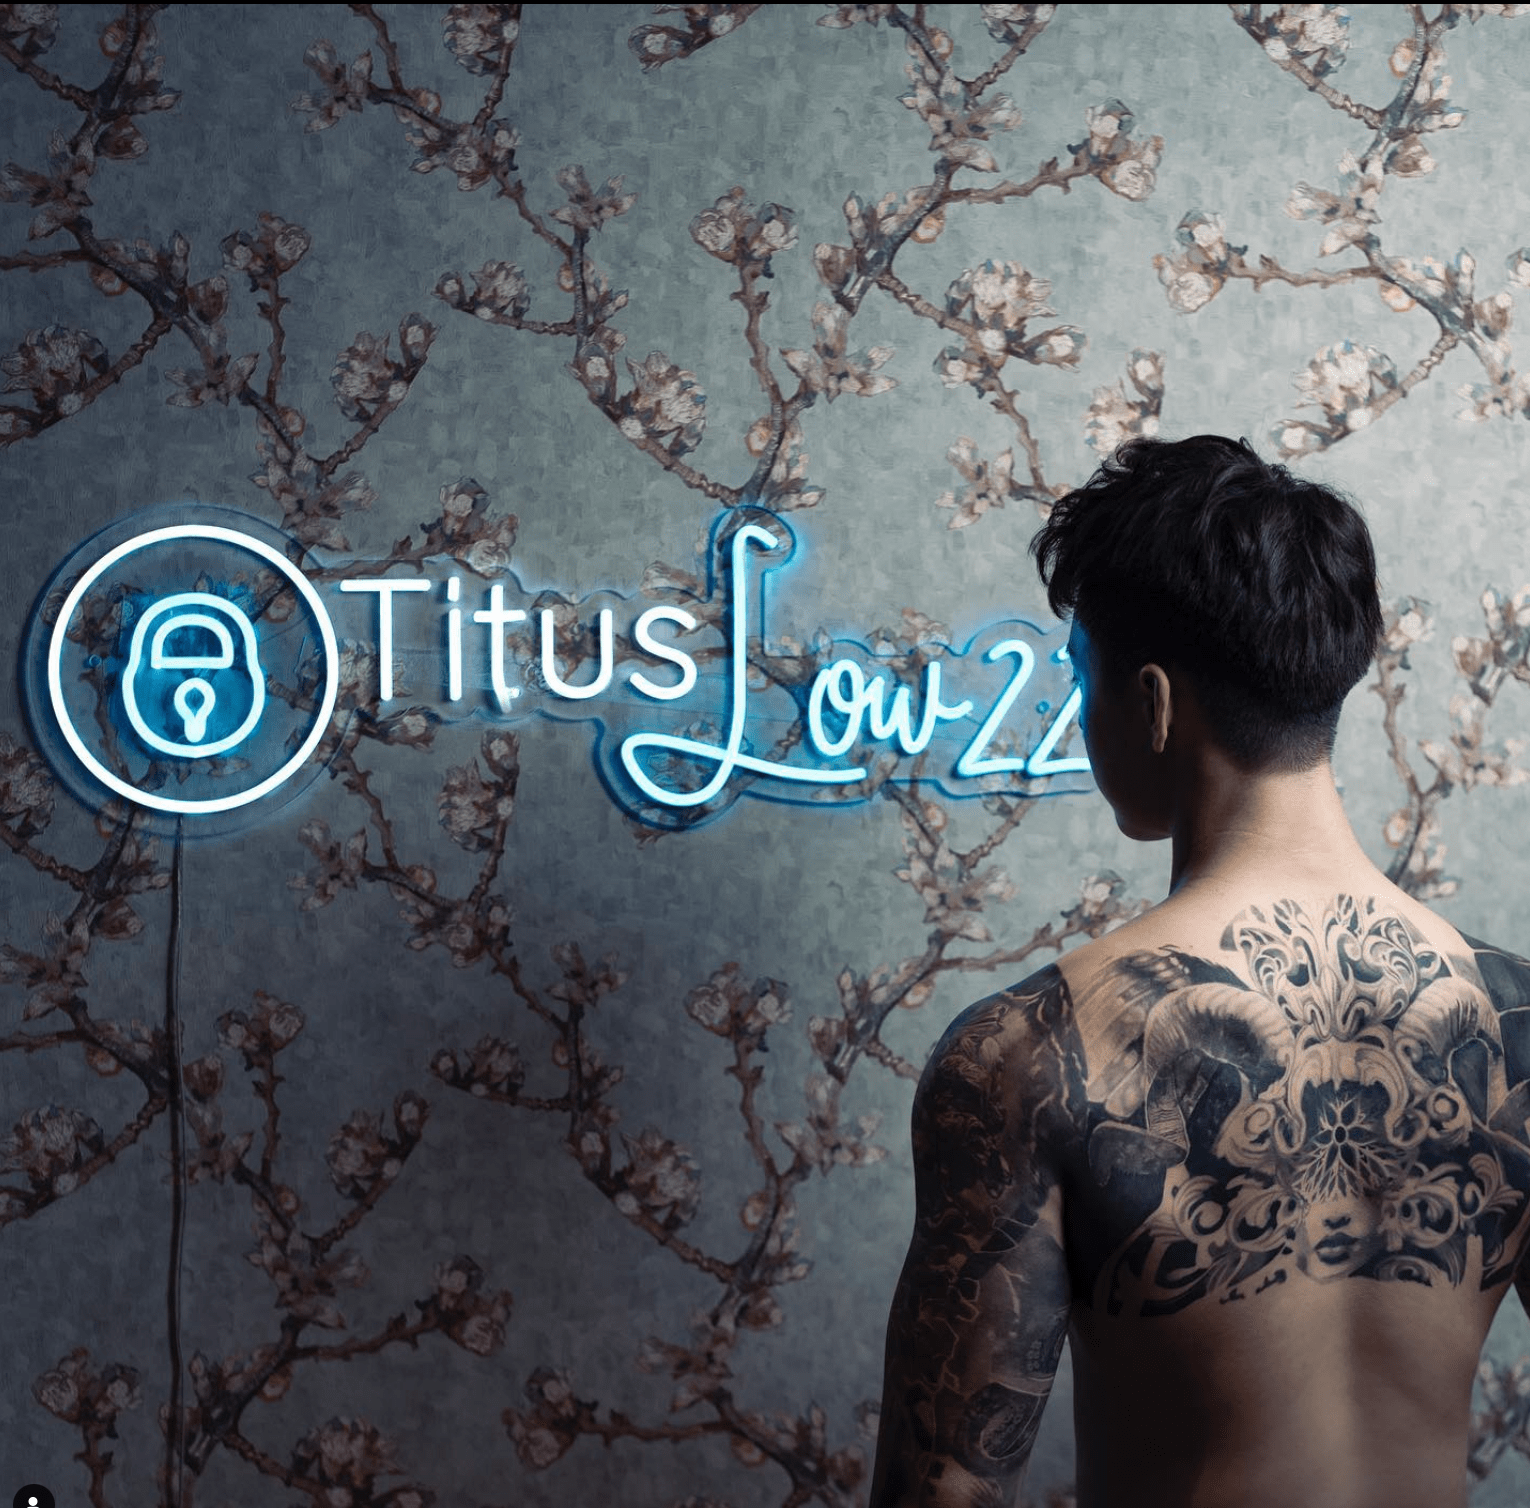 Onlyfans titus low jailed for 3 weeks